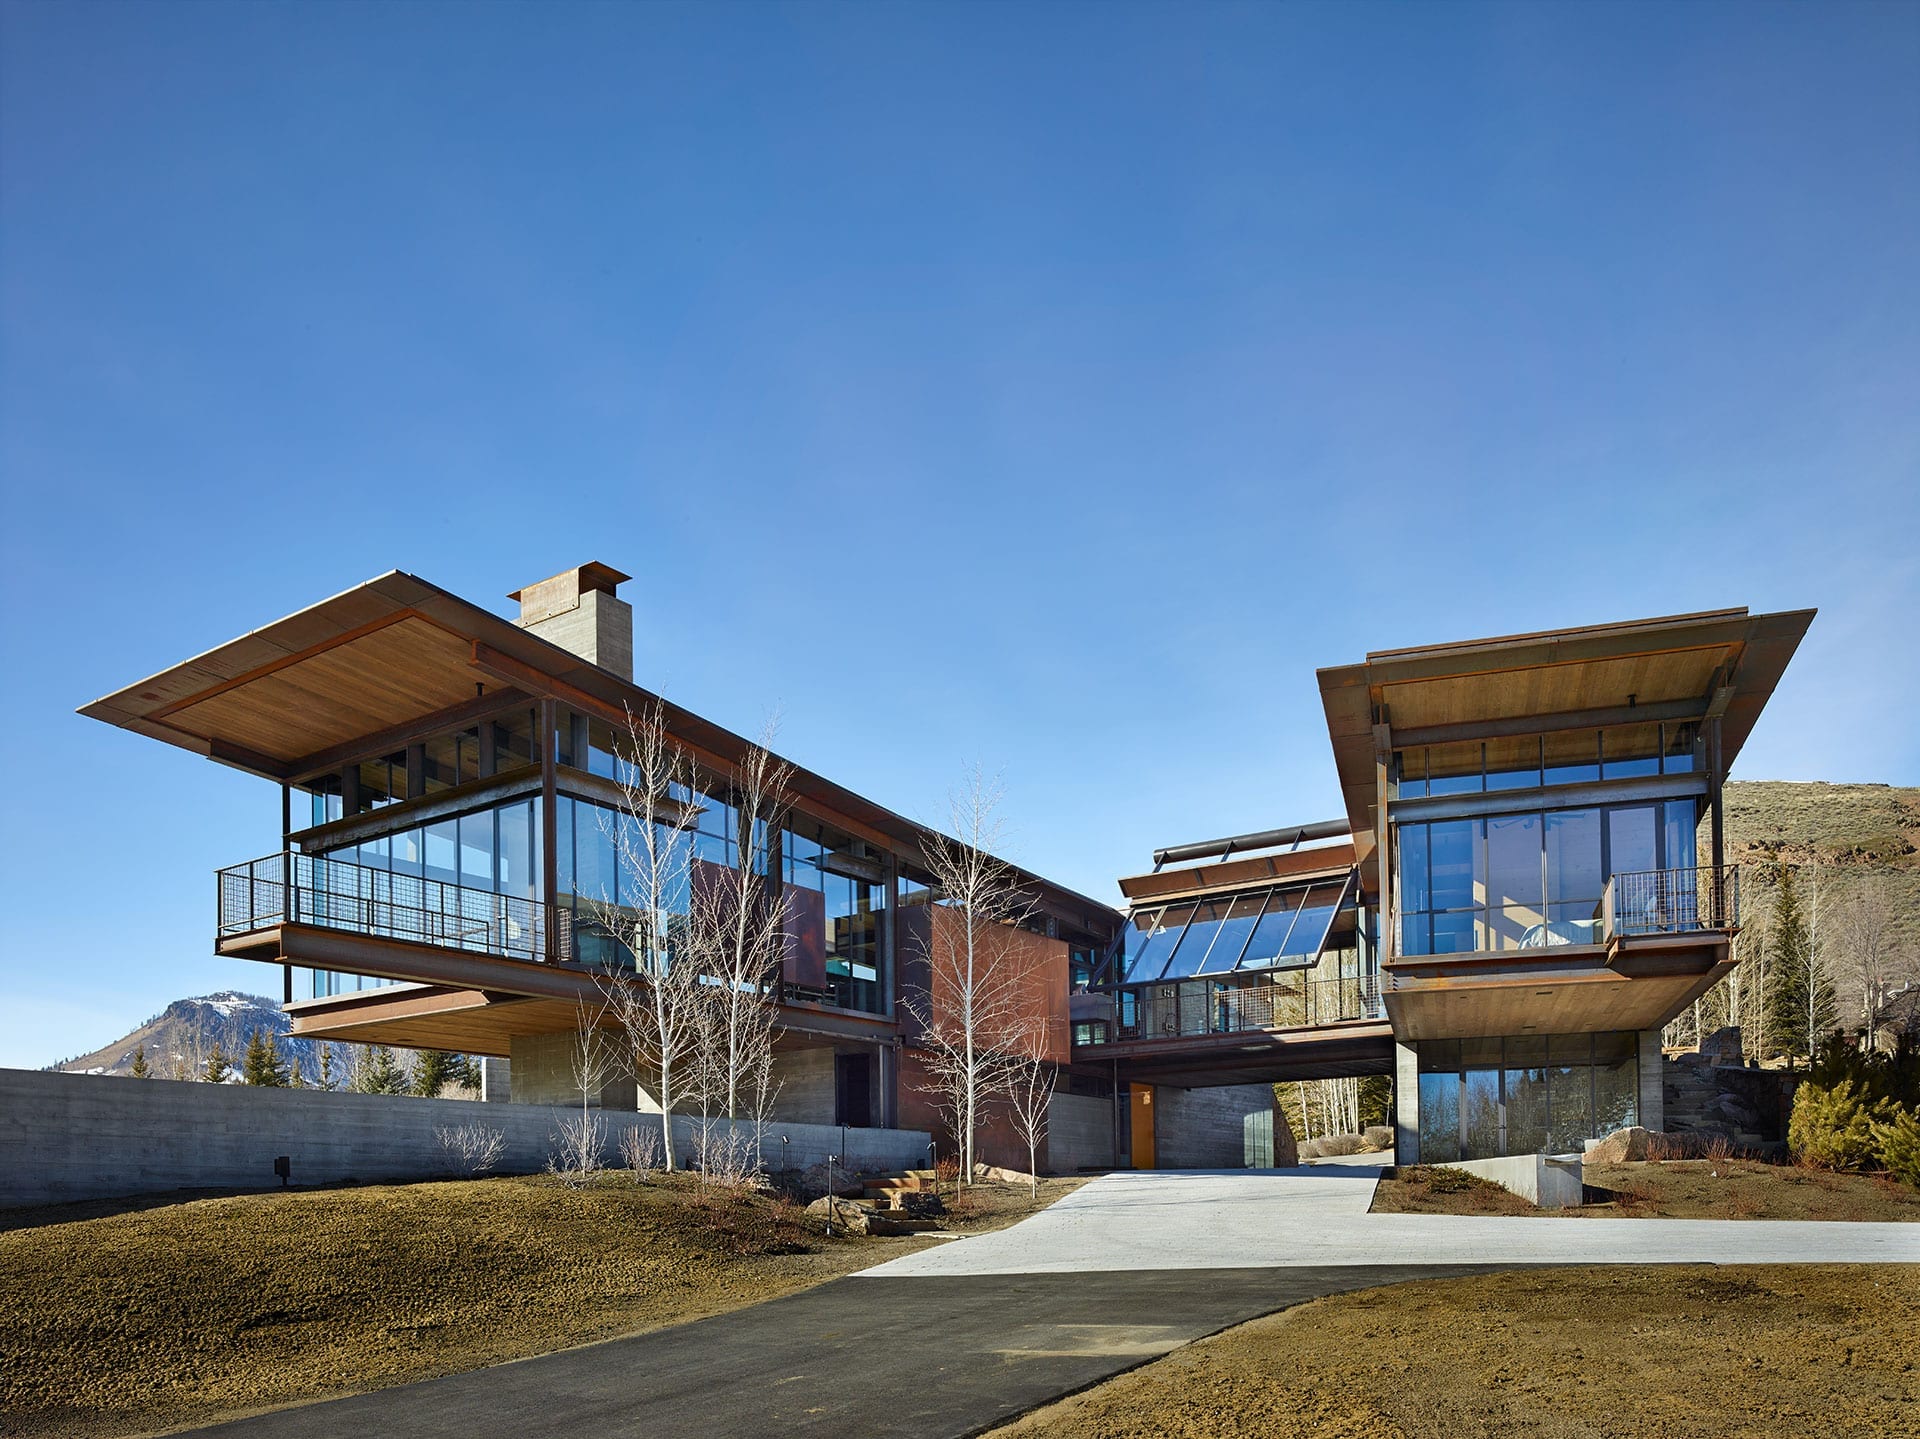 Bigwood residence with steel residential storefront windows and tilting window wall